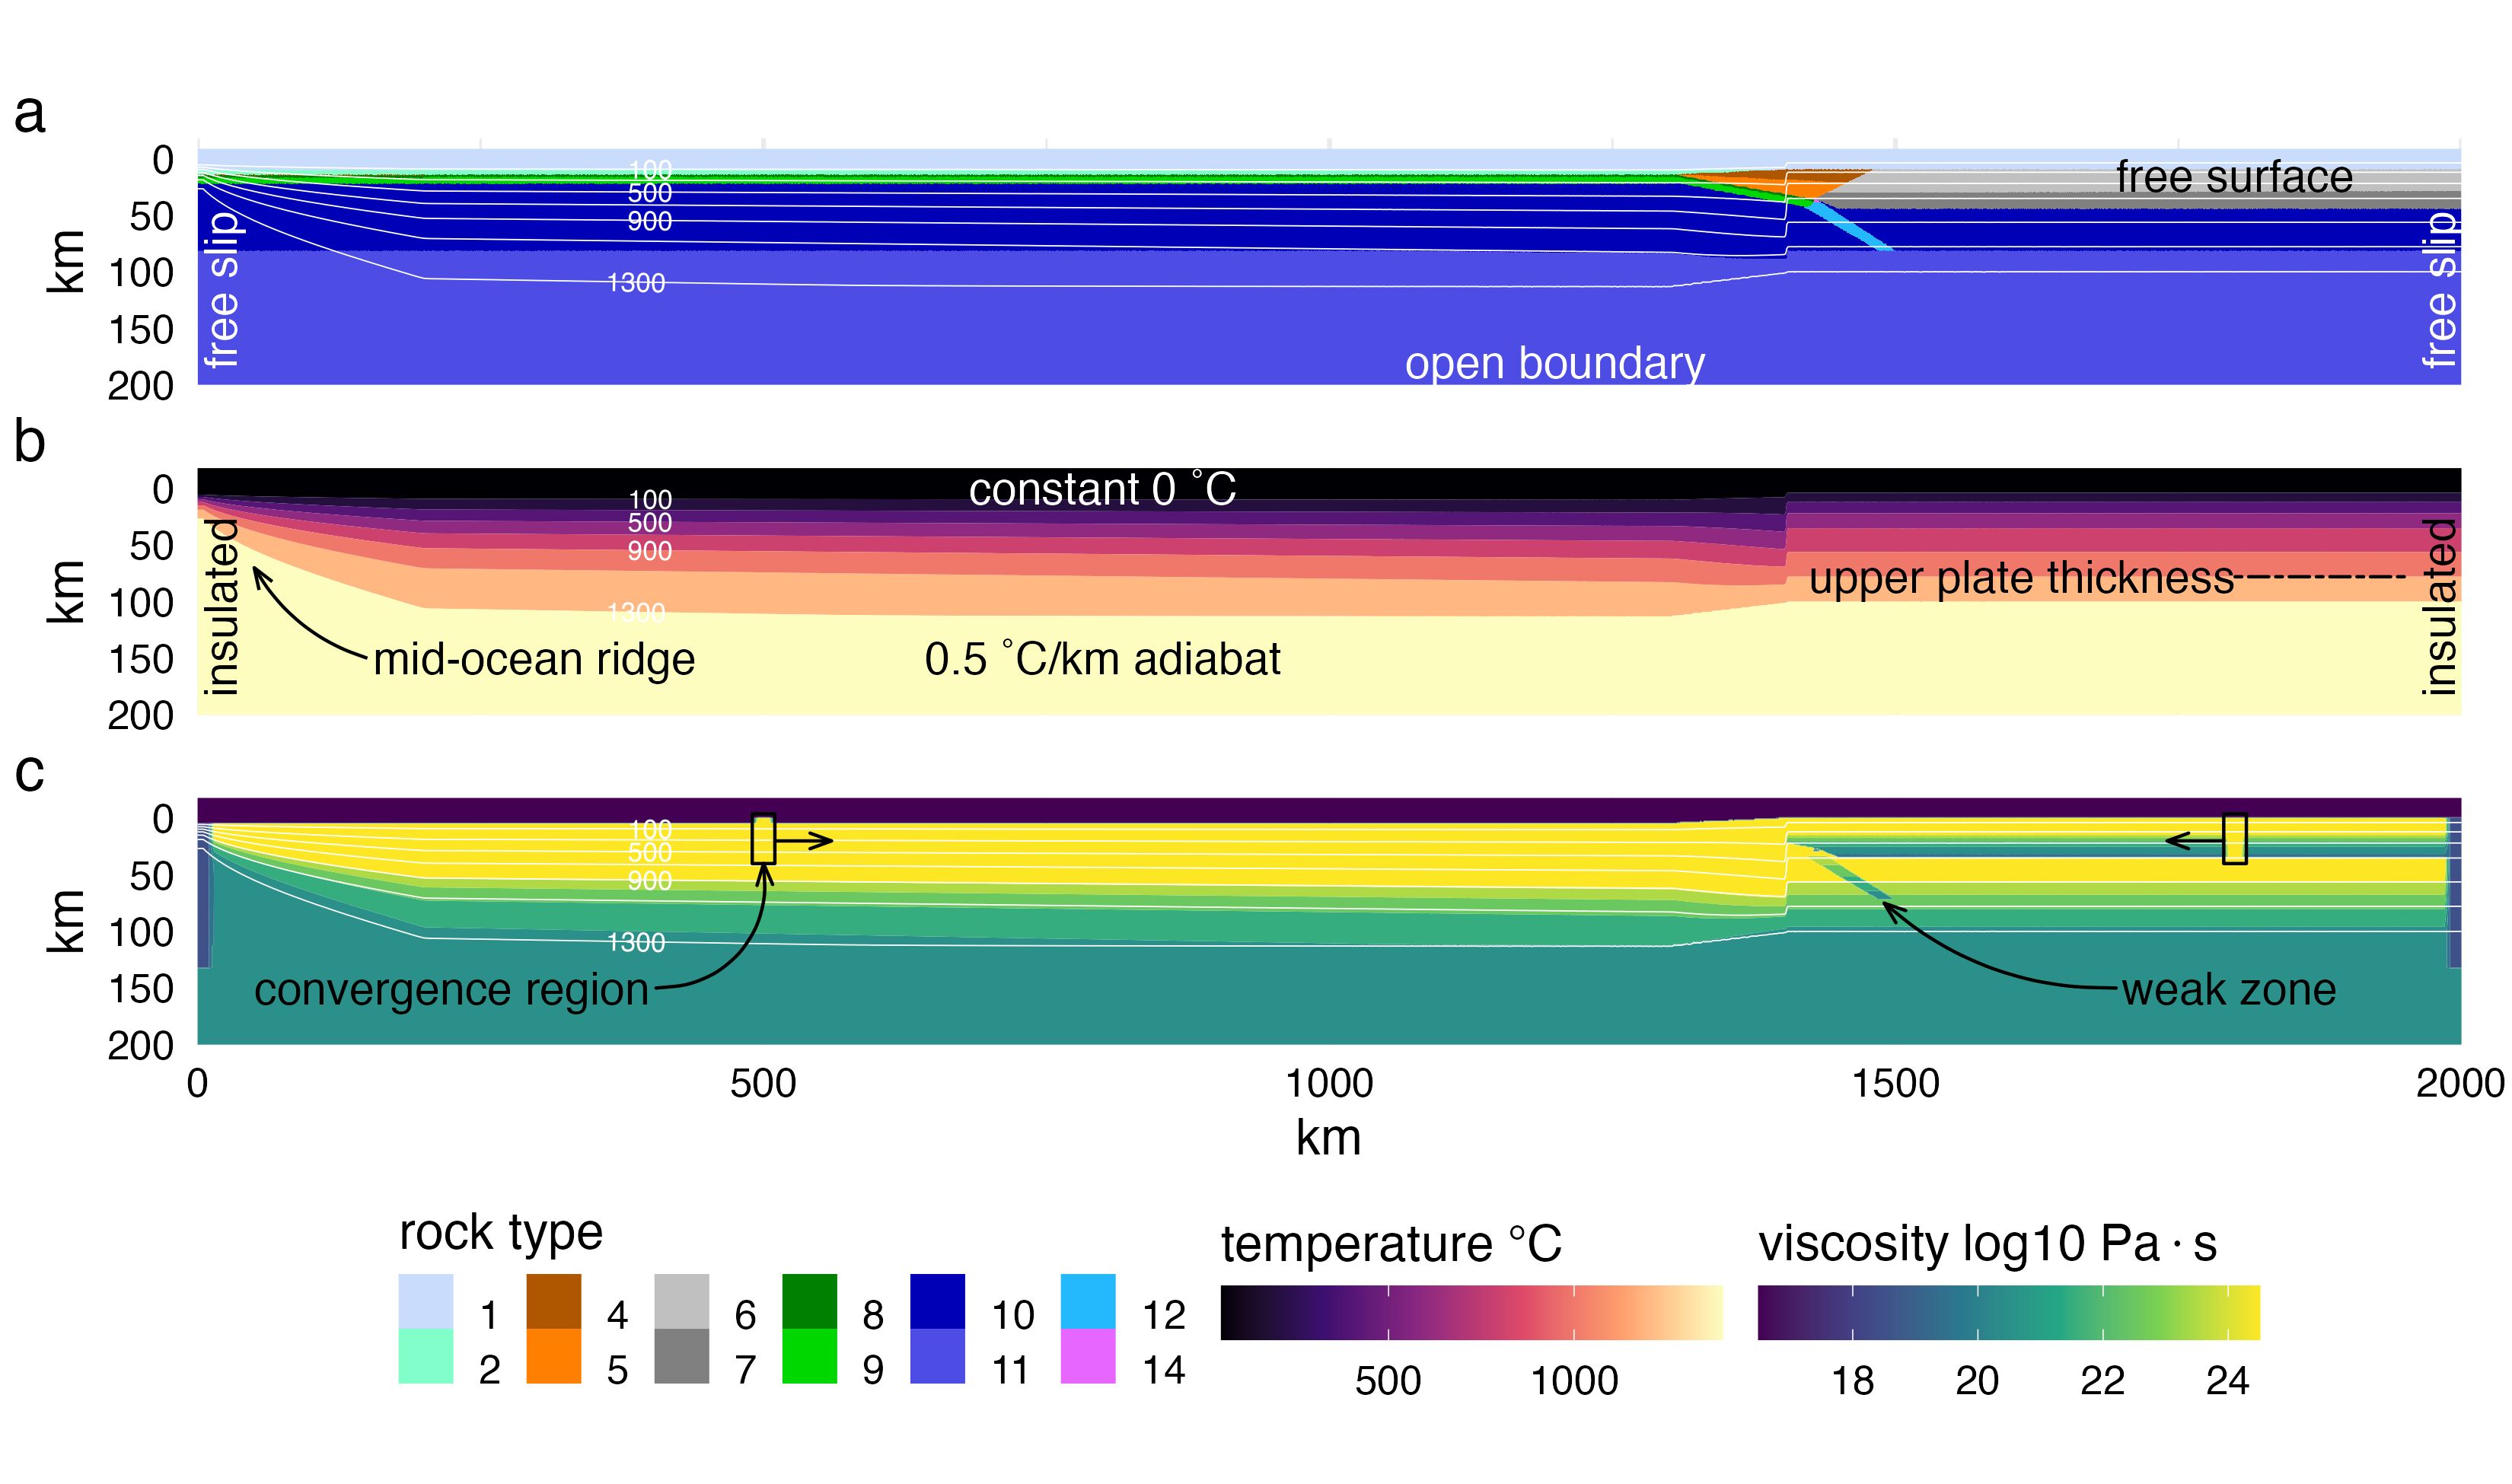 Initial model configuration and boundary conditions. (a) A free sedimentation/erosion boundary at the surface is maintained by implementing a layer of “sticky” air and water, and an infinite-like open boundary at the bottom allows for spontaneous oceanic plate descent and subduction angle. Left and right boundaries are free slip and thermally insulating. Initial material distribution includes 7 km of oceanic crust (2 km basalt, 5 km gabbro), 1 km of oceanic sediments, and 35 km of continental crust, thinning ocean-ward. (b) Oceanic lithosphere is continually created at the left boundary. The oceanic geotherm is calculated using a half-space cooling model and the continental geotherm is calculated using a one-dimensional steady-state conductive cooling model to 1300 ˚C. The base of the upper-plate lithosphere (\(Z_{UP}\)) is defined by visualizing viscosity and generally coincides with the 1100 ˚C isotherm. (c) Oceanic crust is bent under loading from passive margin sediments, and a weak zone extends through the lithosphere to help induce subduction. Convergence velocities are imposed at stationary, high-viscosity regions far from the trench. Rock type colors are: [1] air, [2] water, [4,5] sediments, [6,7] felsic crust, [8] basalt, [9] gabbro, [10,11] dry mantle, [12] hydrated mantle, [14] serpentinized mantle.